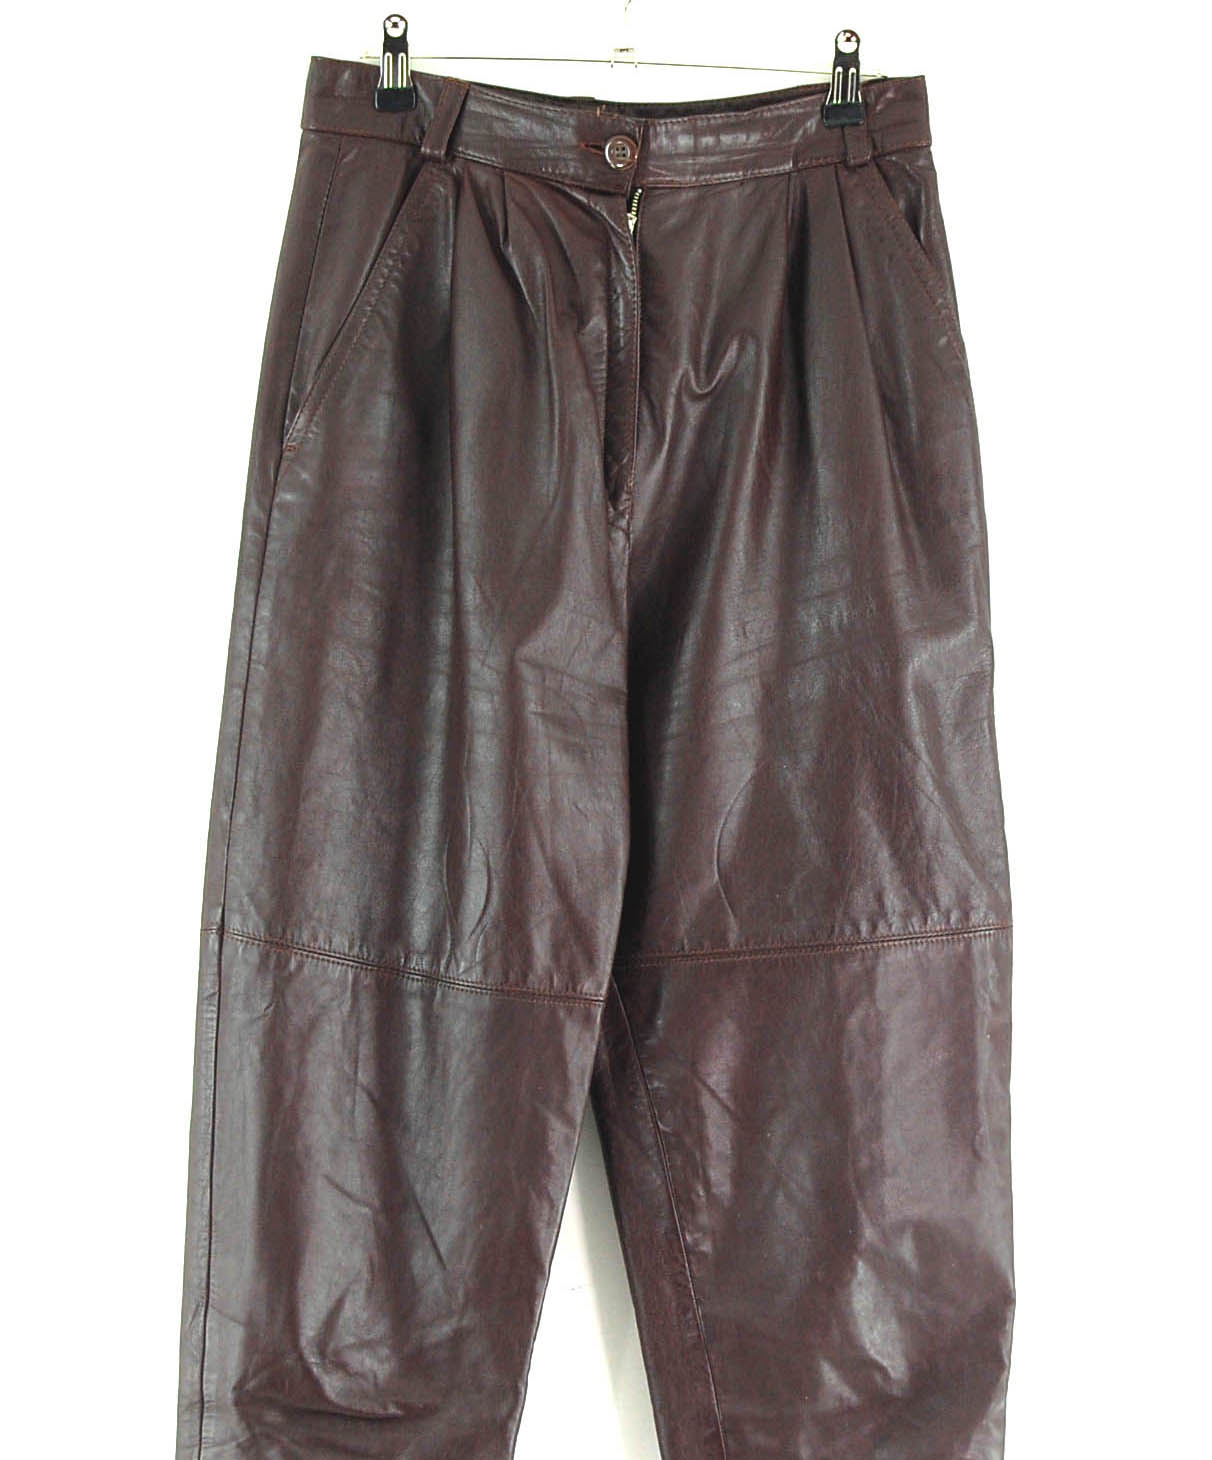 80s Brown Leather Trousers - UK 10 - Blue 17 Vintage Clothing